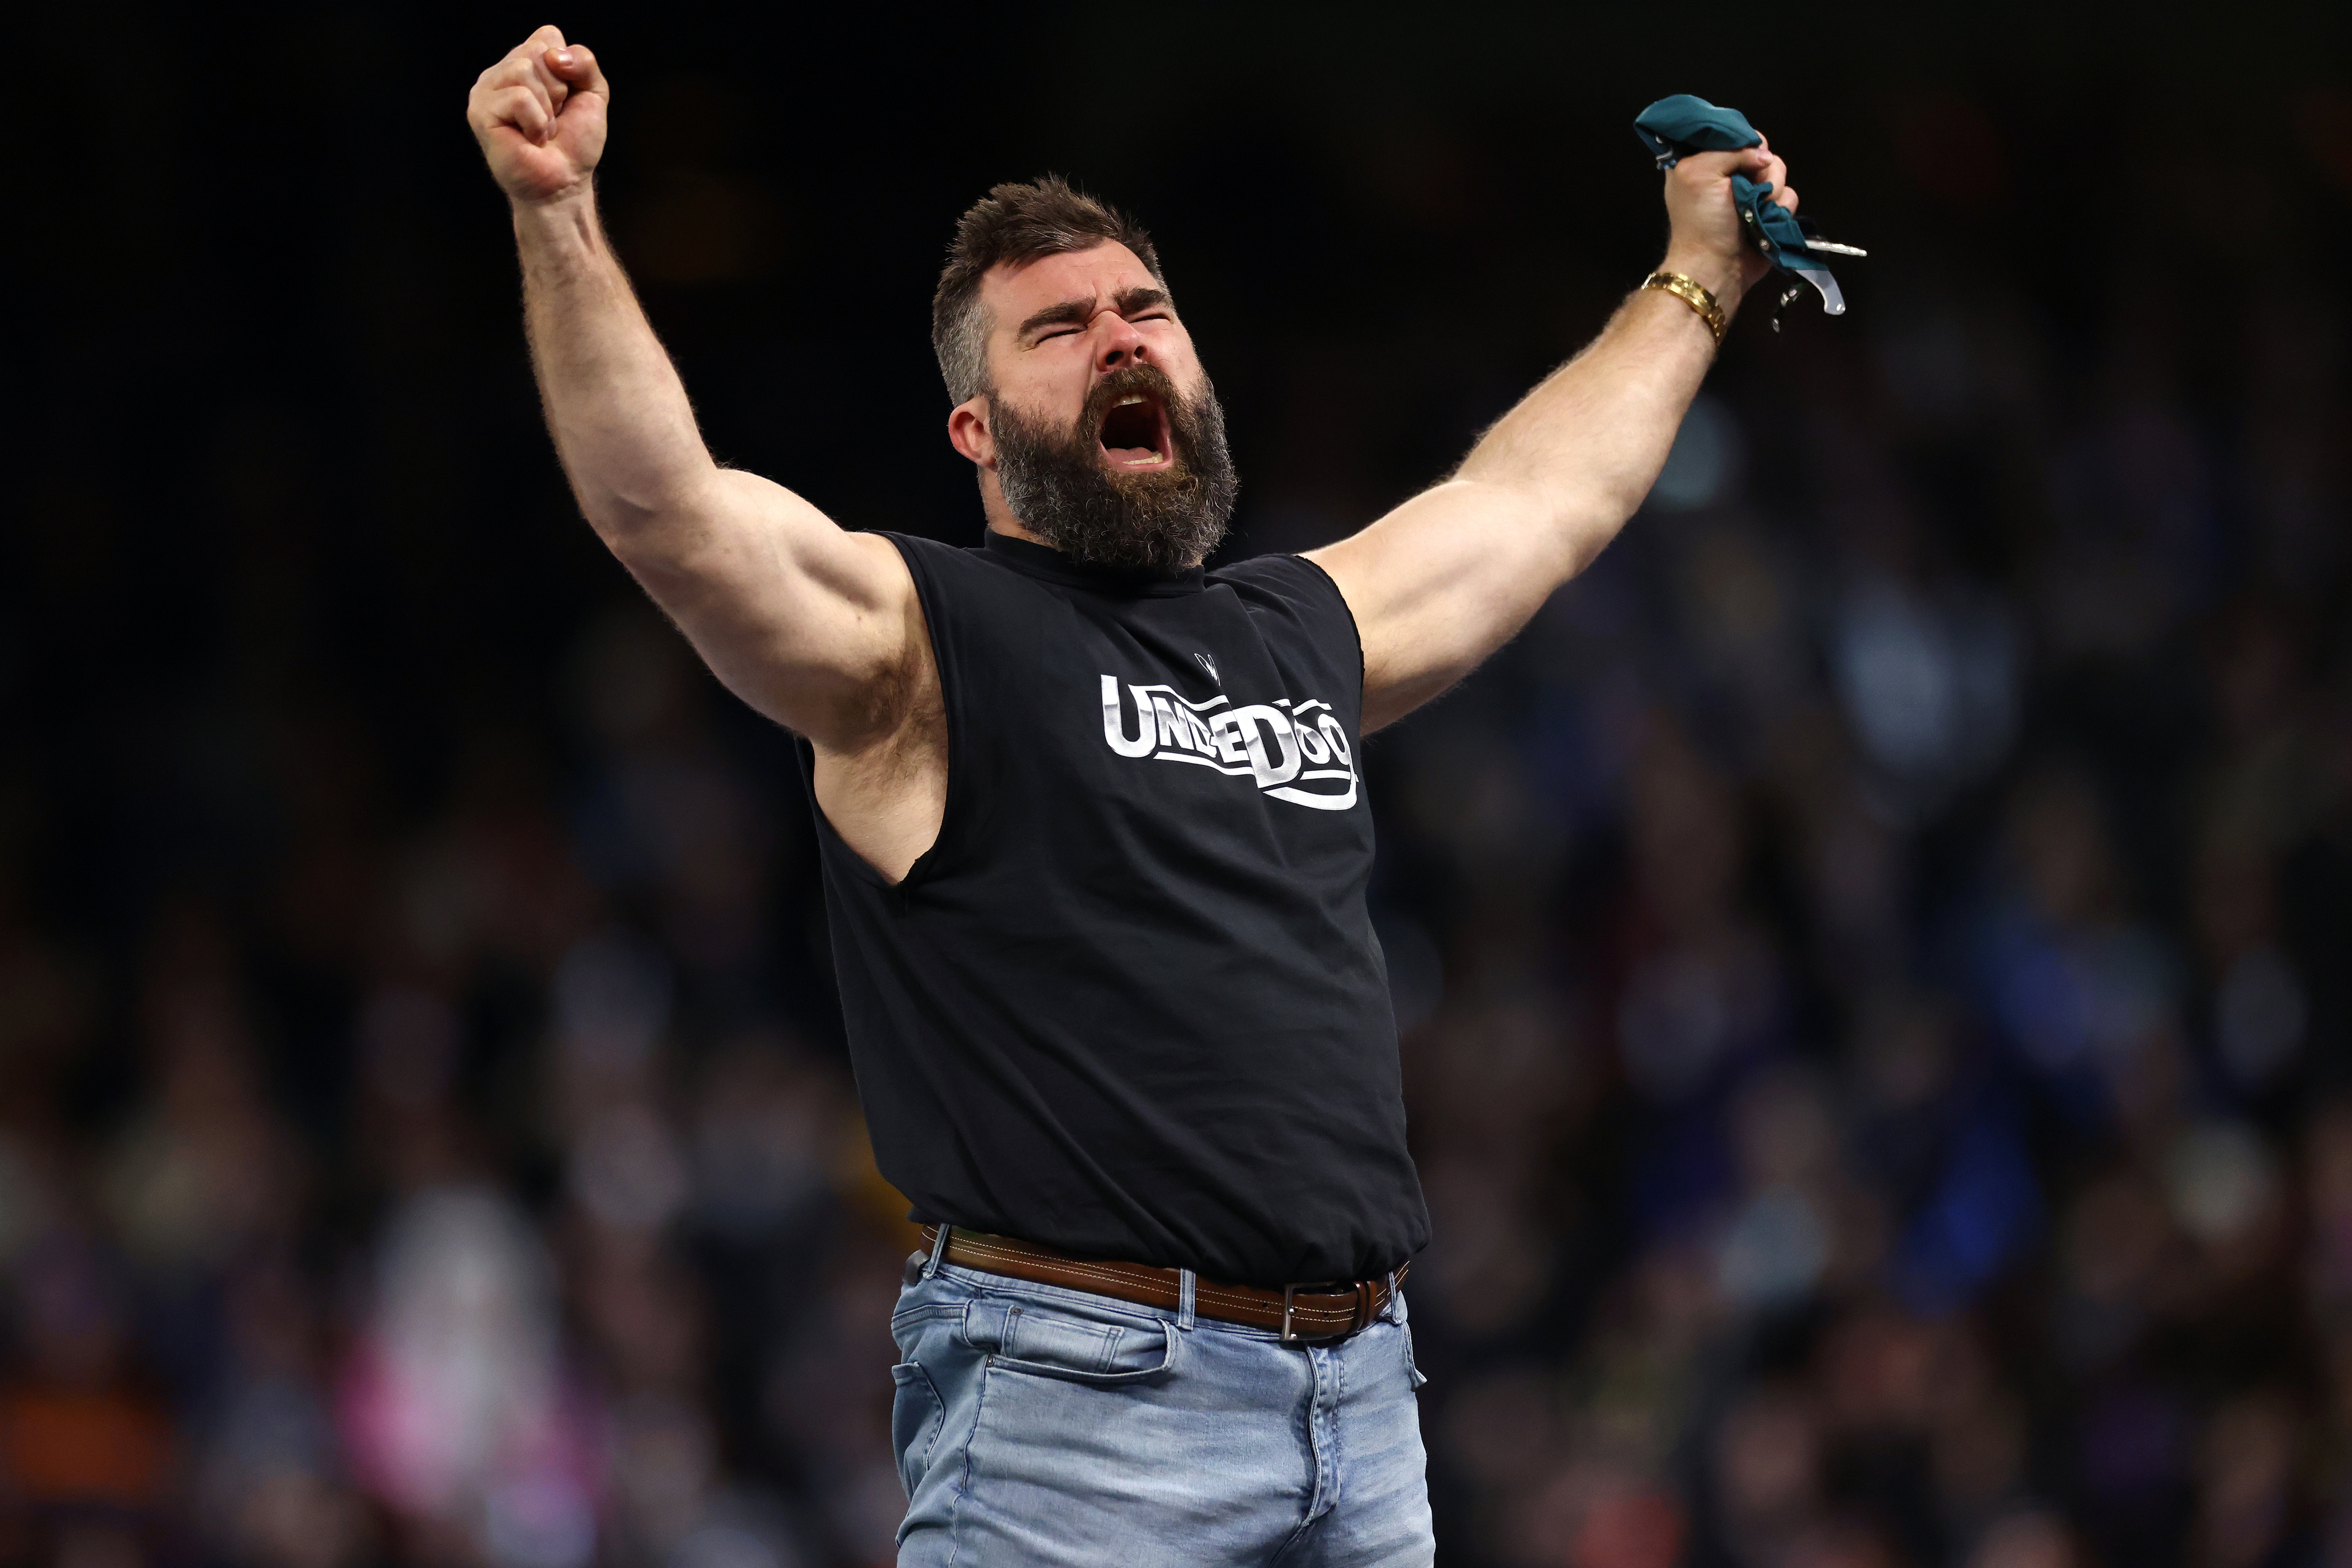 Man with beard in a t-shirt and jeans cheering with arms raised in victory